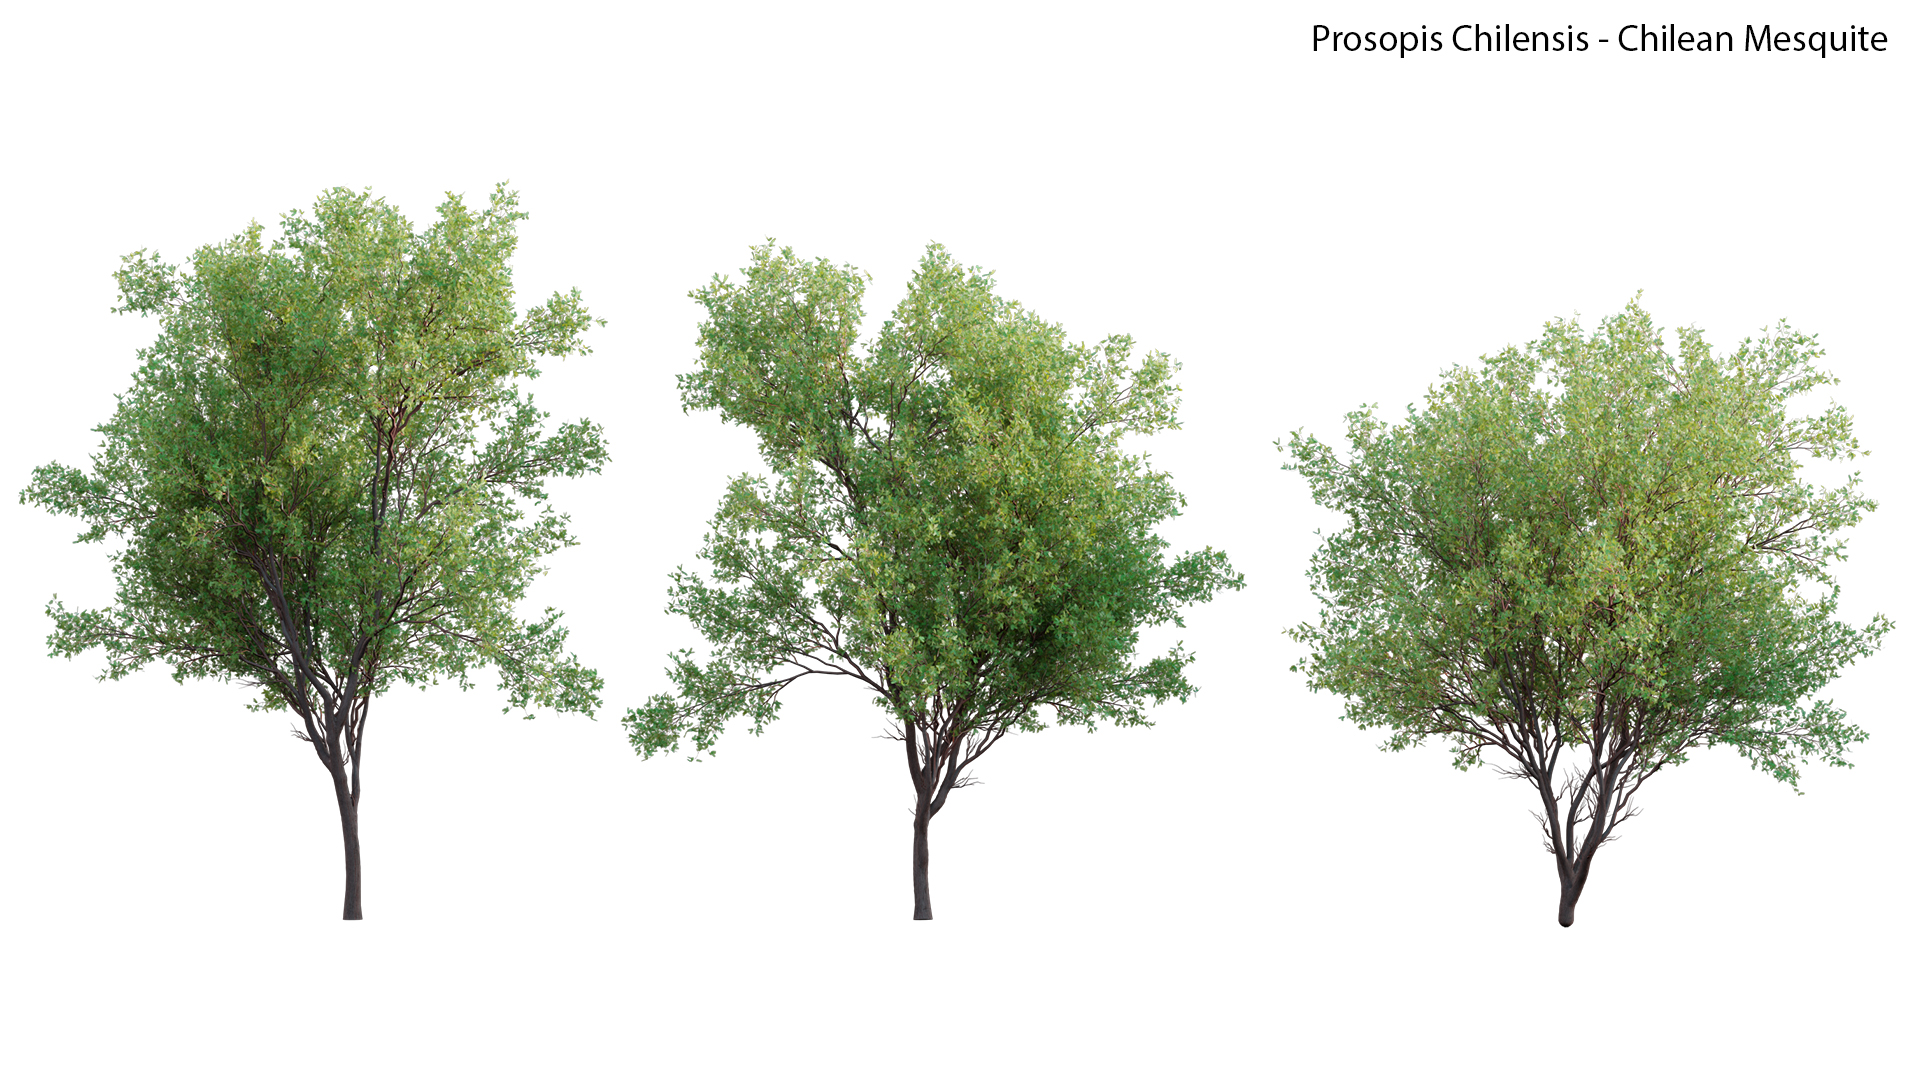 Prosopis Chilensis - Chilean Mesquite - Group 01